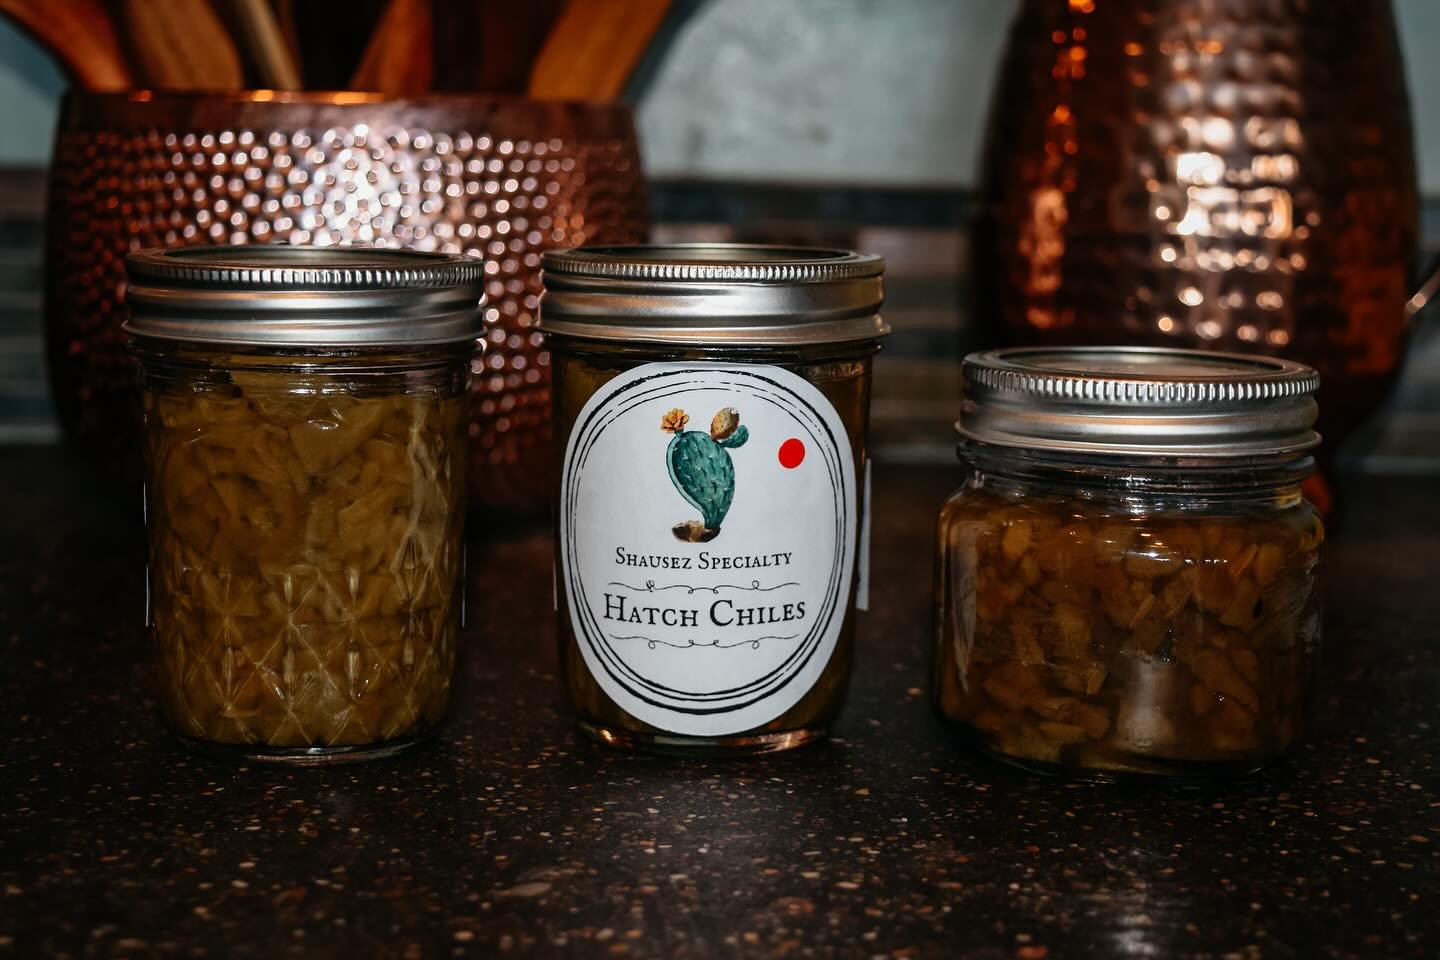 My mom started a business and I wanted to share some of the products she has for sale. 

Mild, Medium and Hot Green Hatch Chiles in half pint jars. $8.00 each

Cowboy Candy in pint jars. $12.00 each (this is my absolute fav hence the picture shows a 